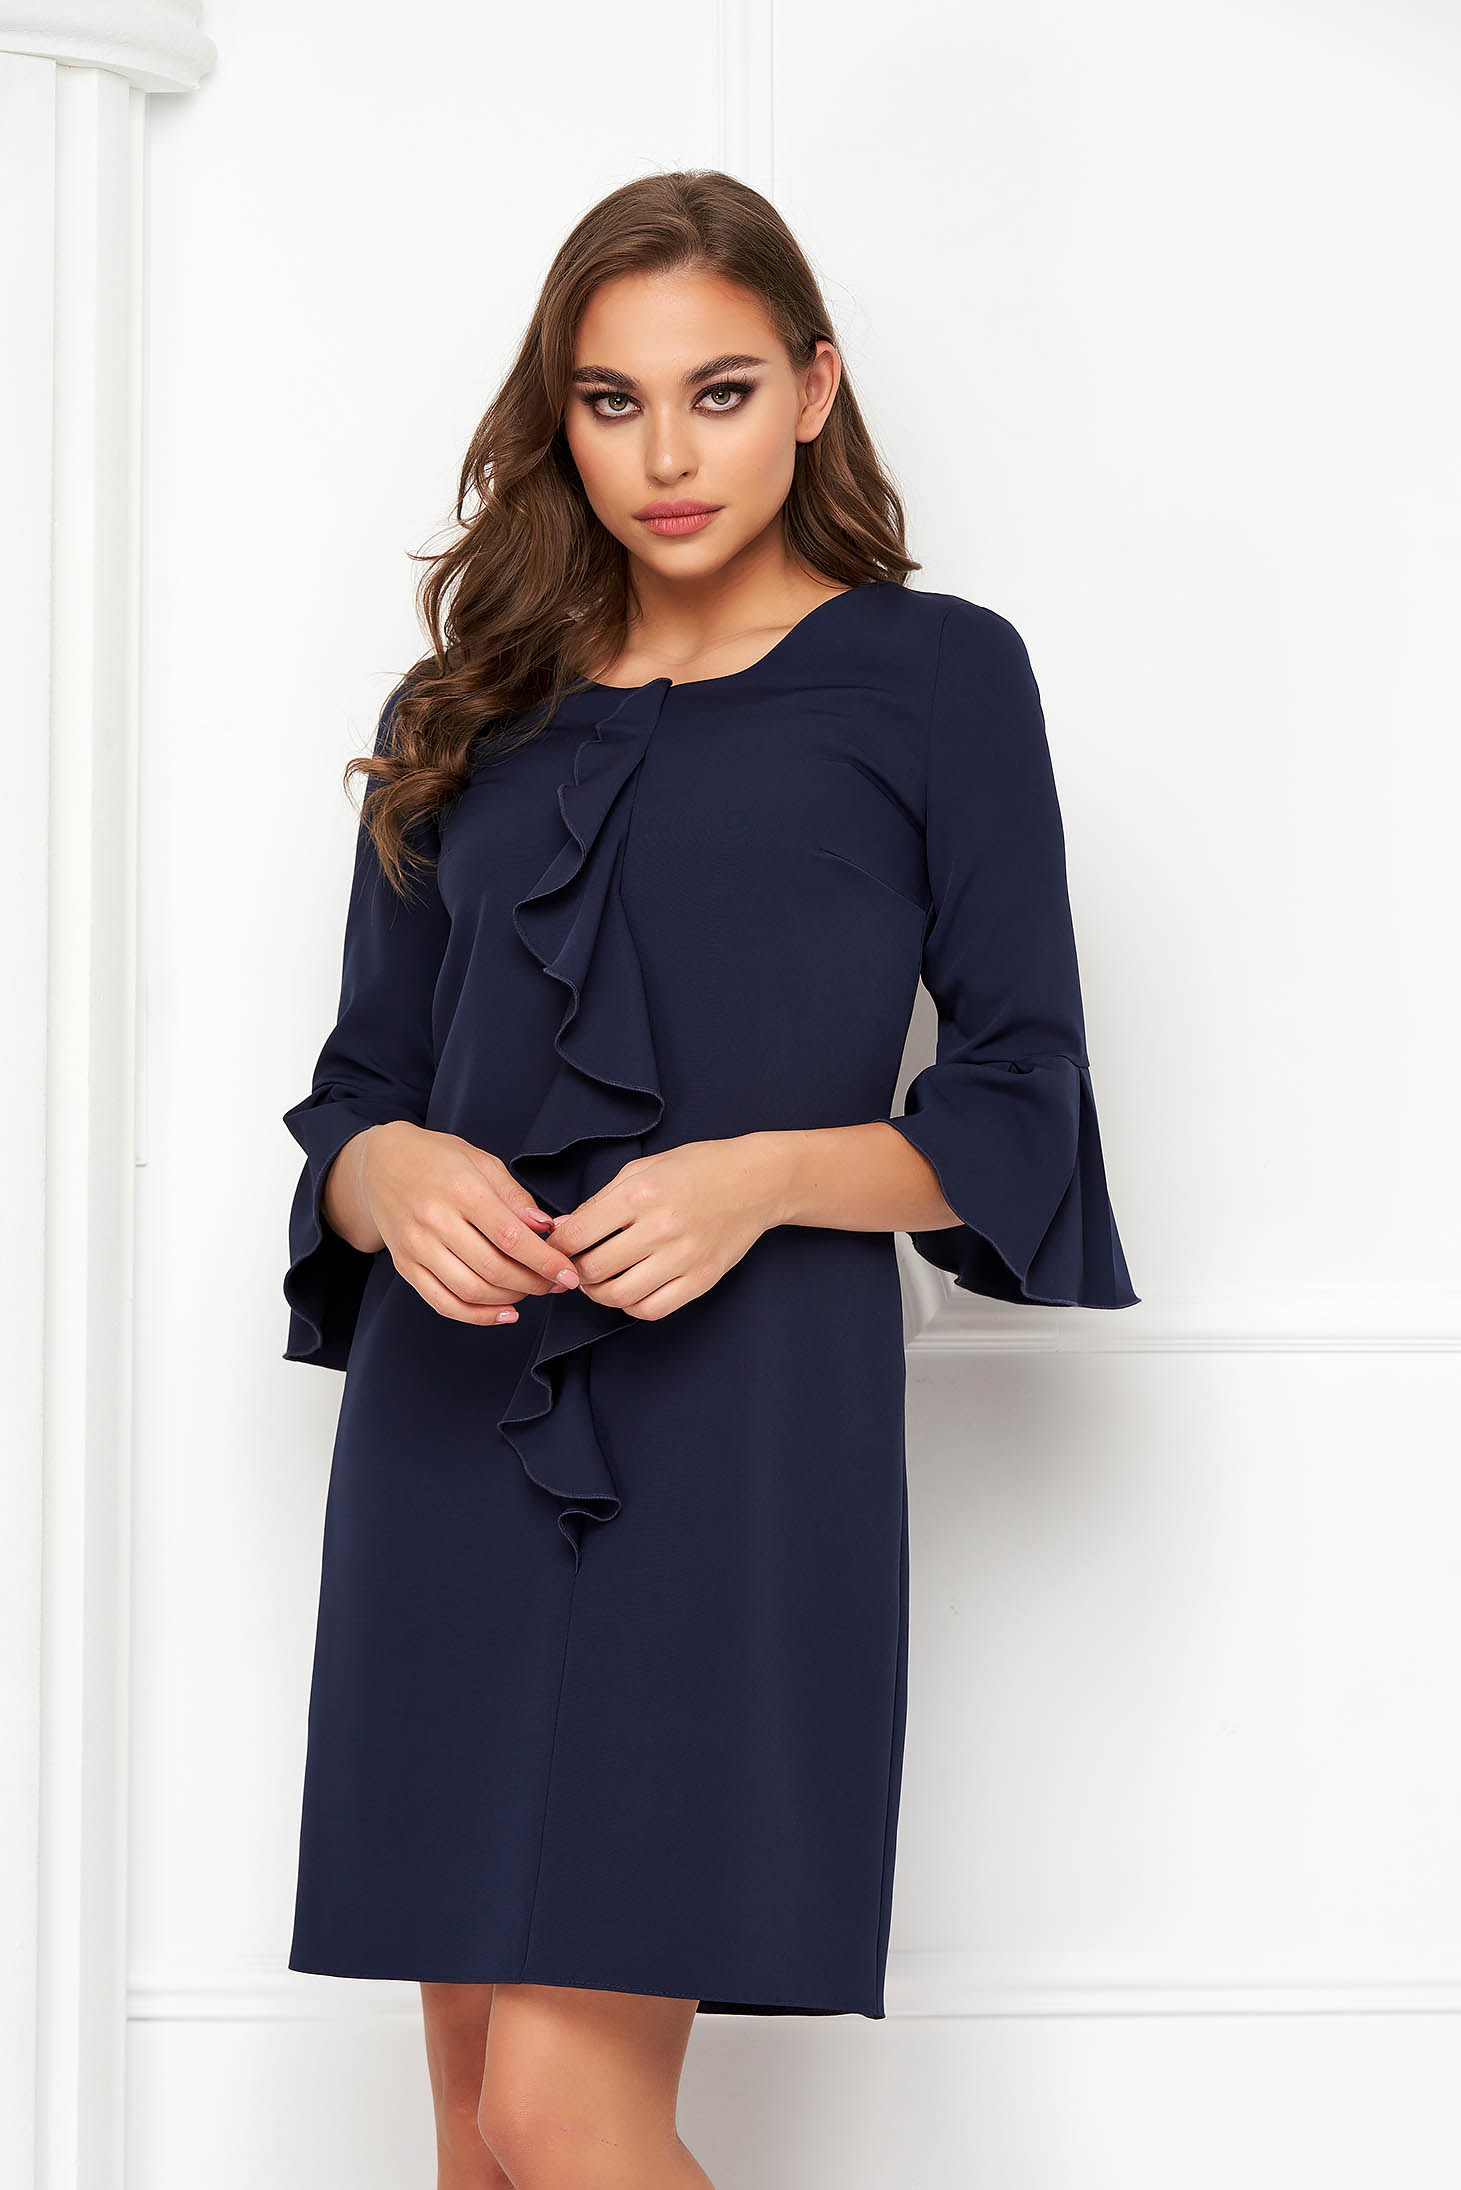 Dark blue dress slightly elastic fabric short cut loose fit with ruffle details - StarShinerS